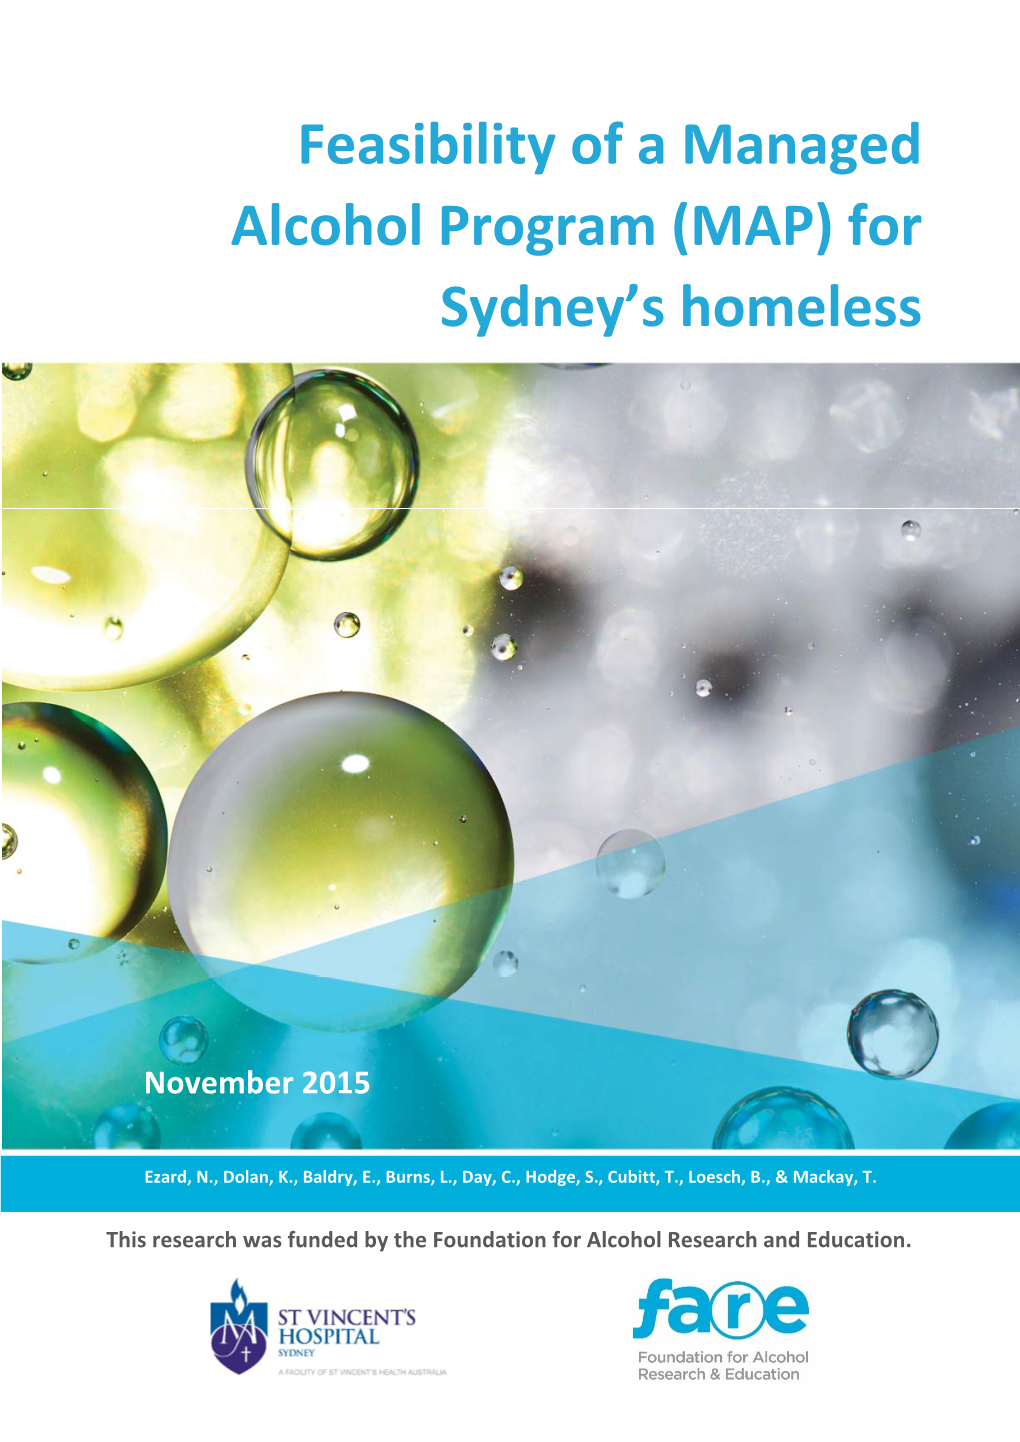 Feasibility of a Managed Alcohol Program (MAP) for Sydney’S Homeless